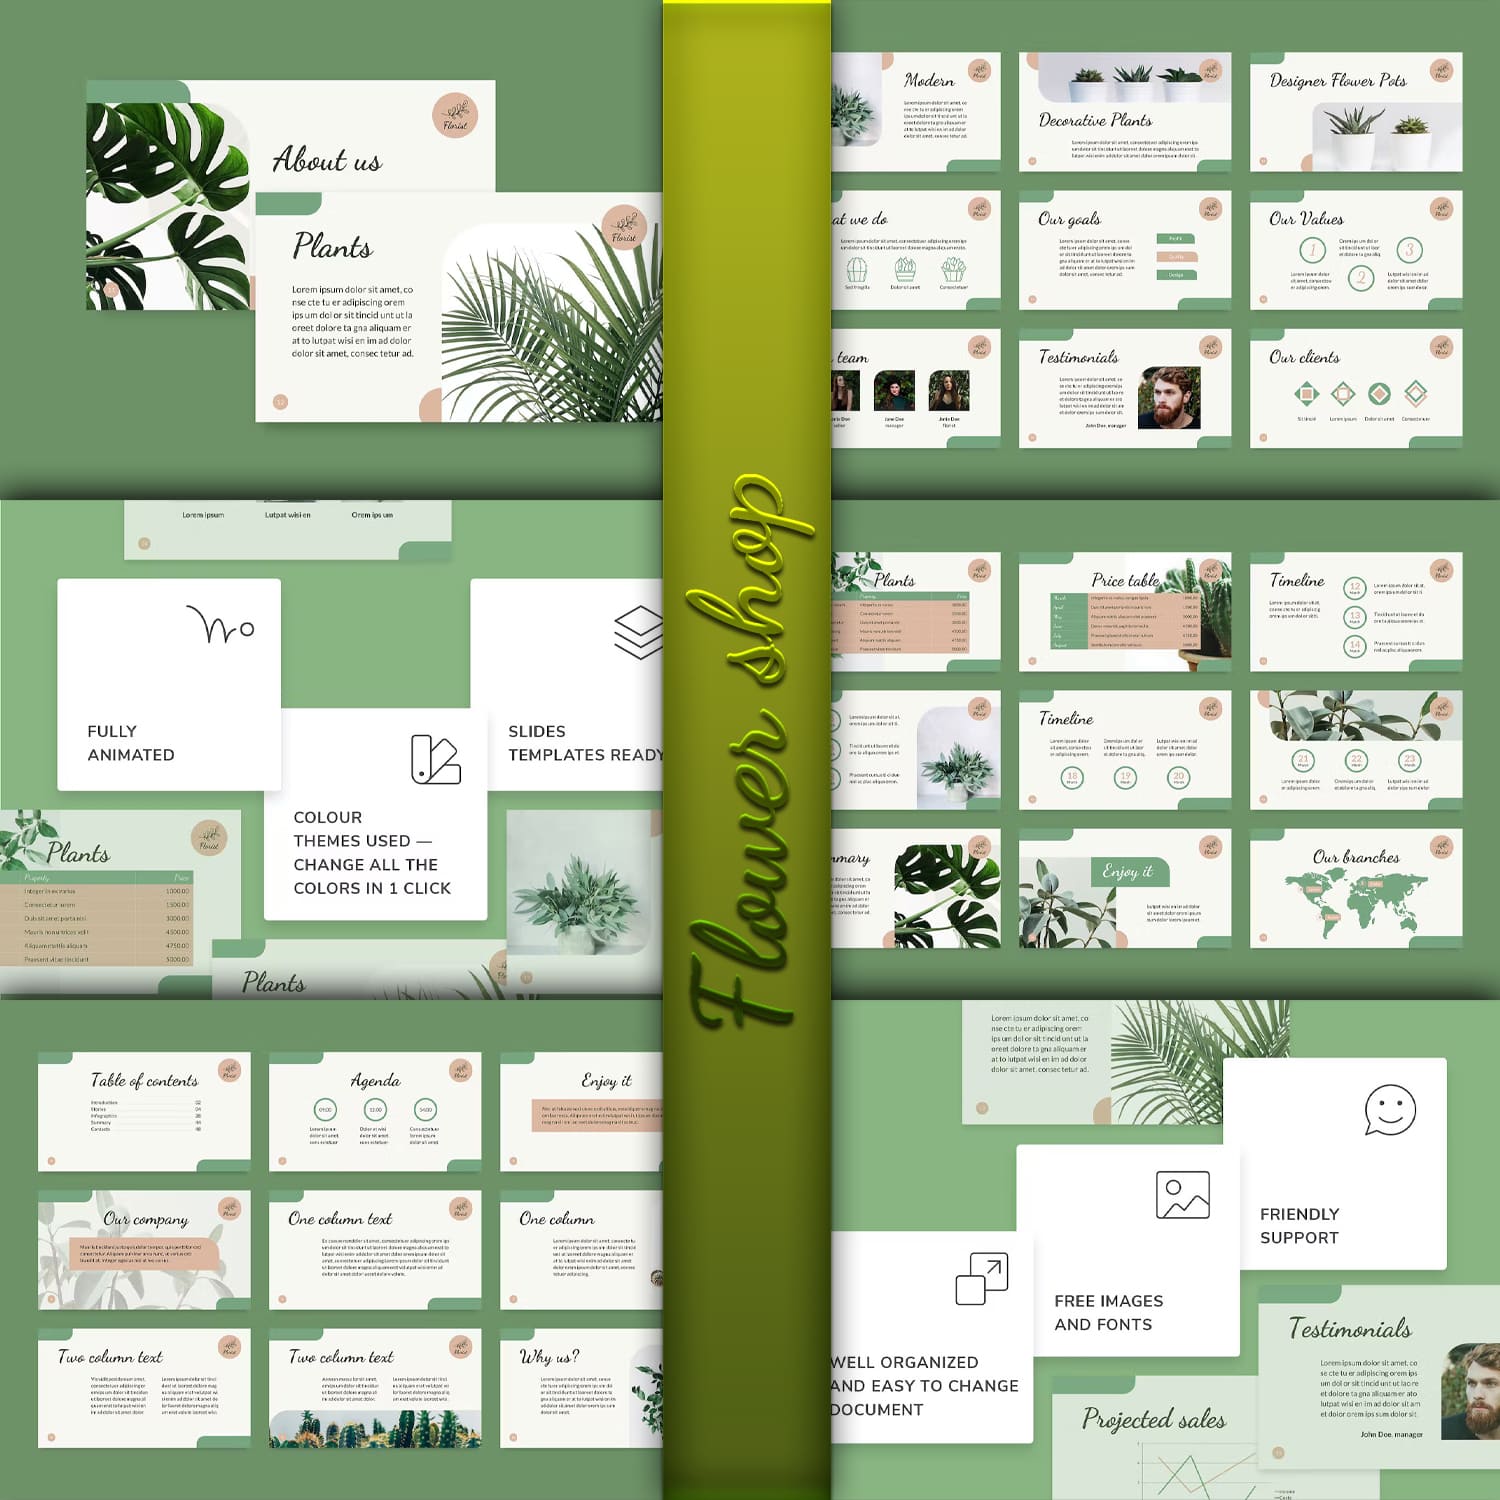 Flower Shop PowerPoint Presentation Template - main image preview.